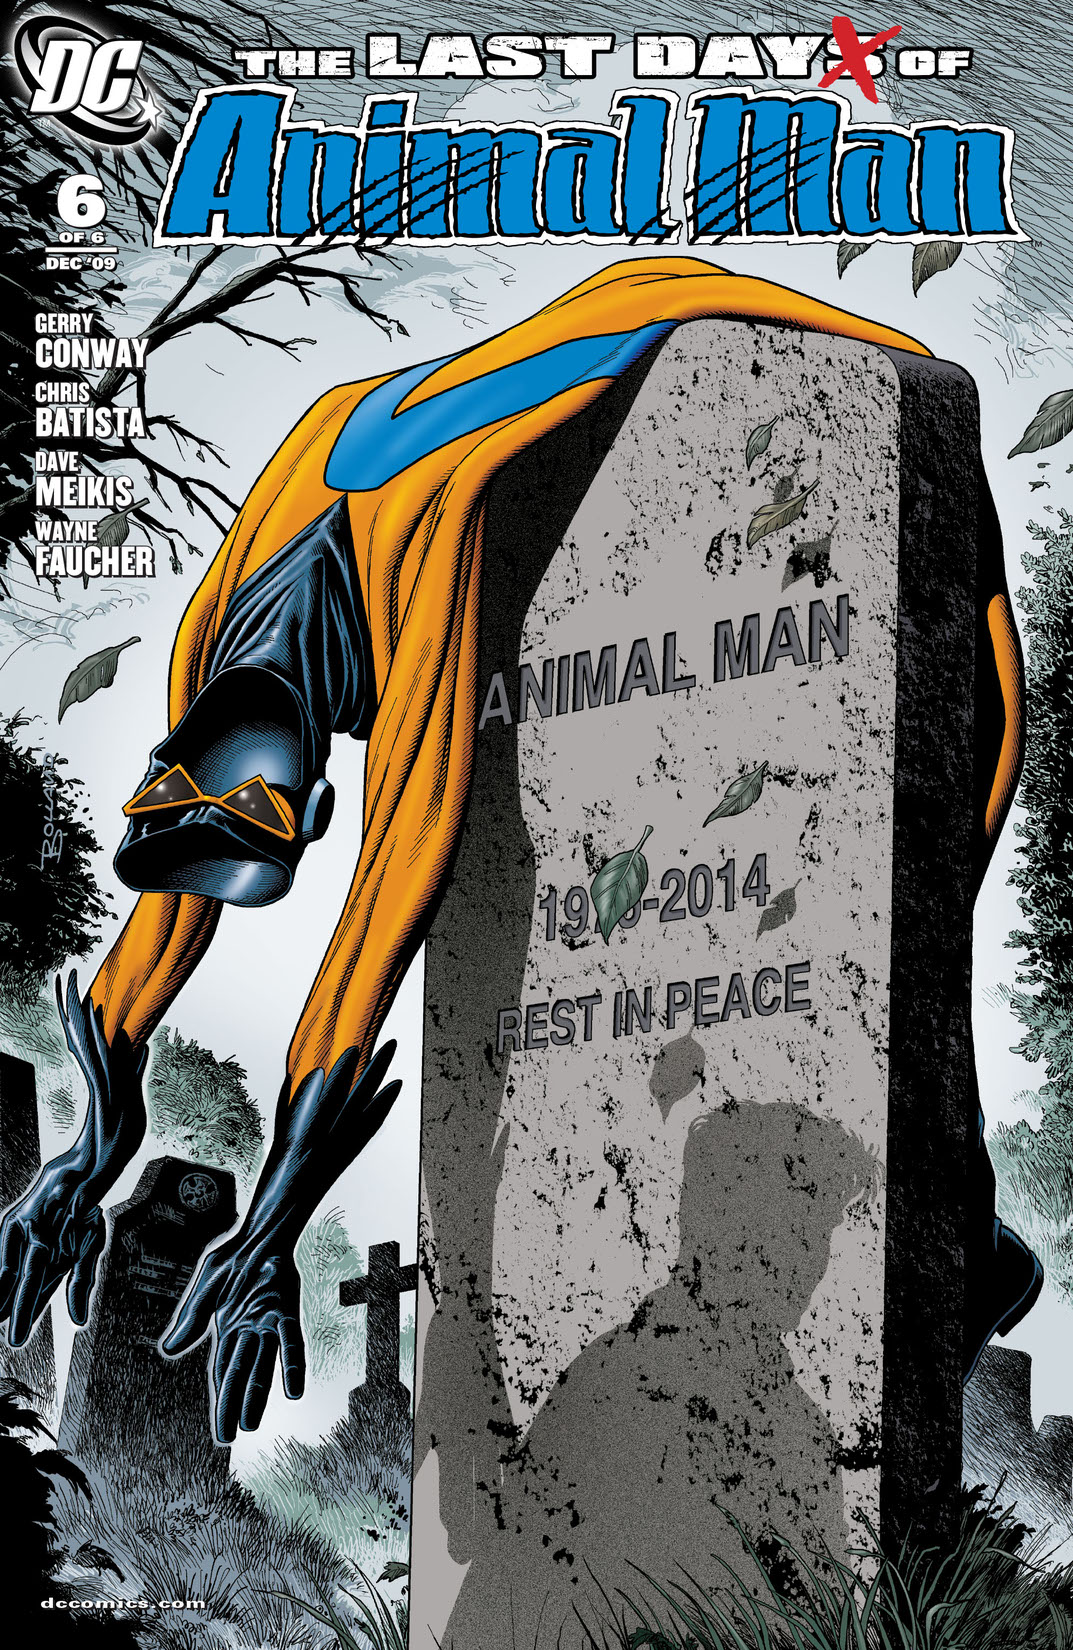 The Last Days of Animal Man #6 preview images